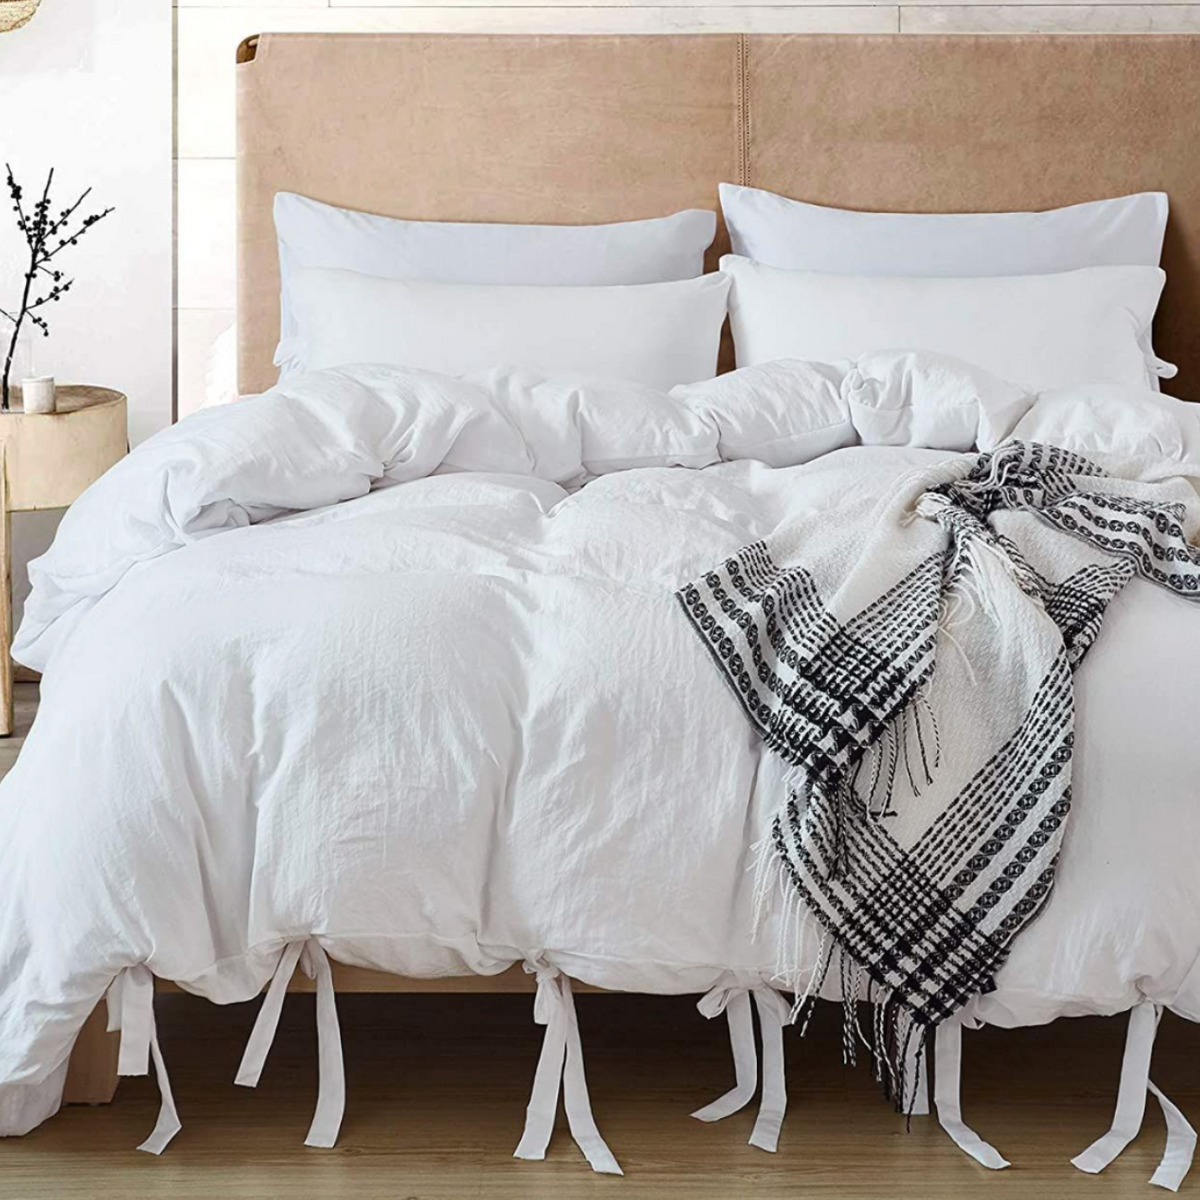 20 Best Duvet Covers 2022 The Strategist, How To Insert Duvet Into Cover With Ties